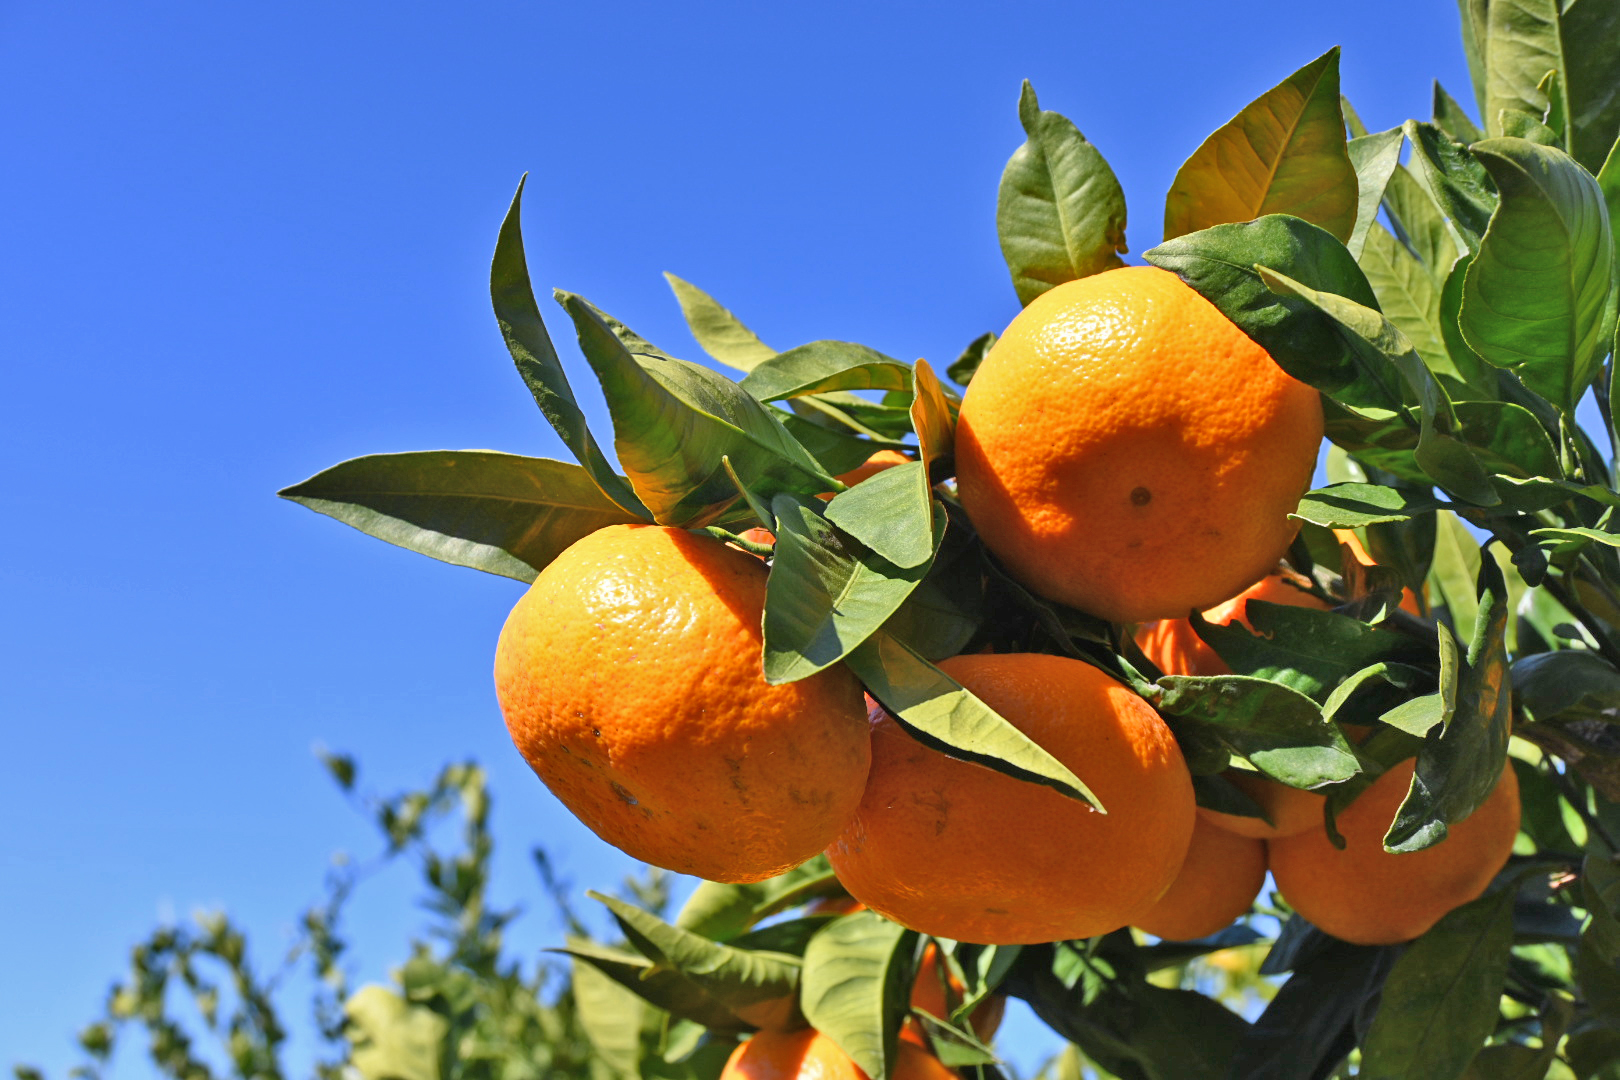 Toba, a place to grow citrus fruits…